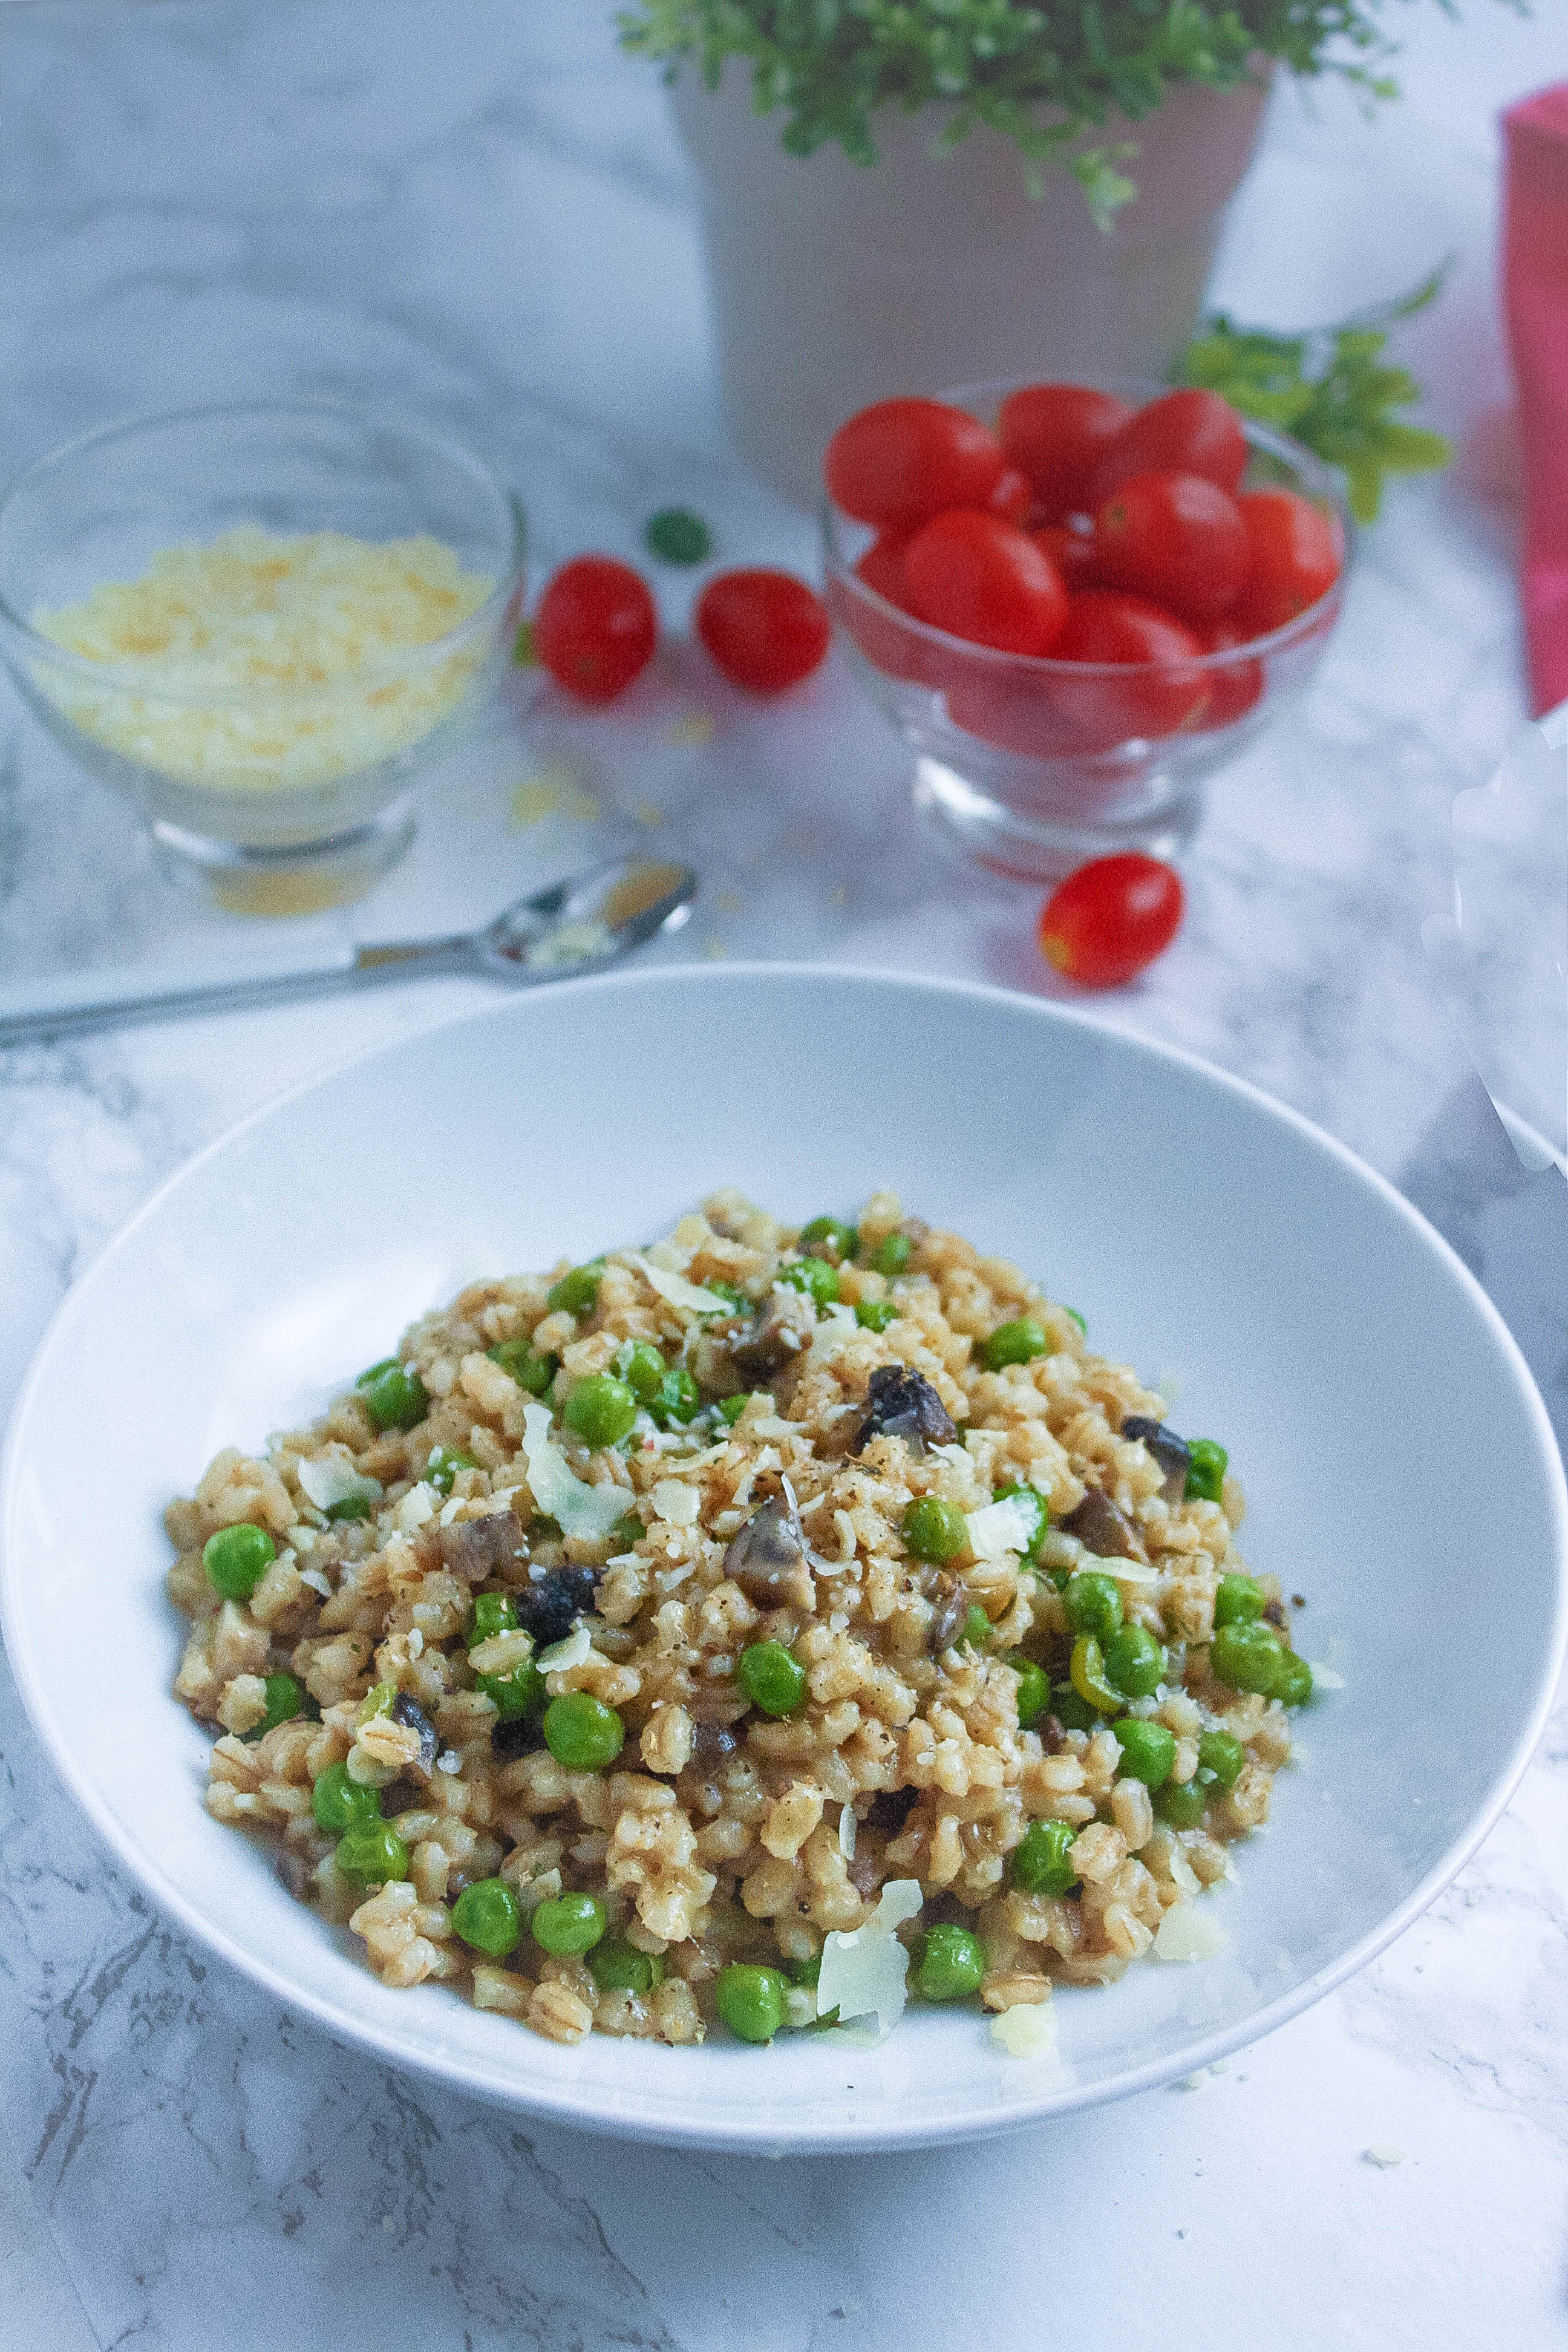 Barley Risotto with Mushrooms and Peas is a stick-to-your-ribs kind of dish you'll love! Barley Risotto with Mushrooms and Peas is hearty and so flavorful as a meatless dish.